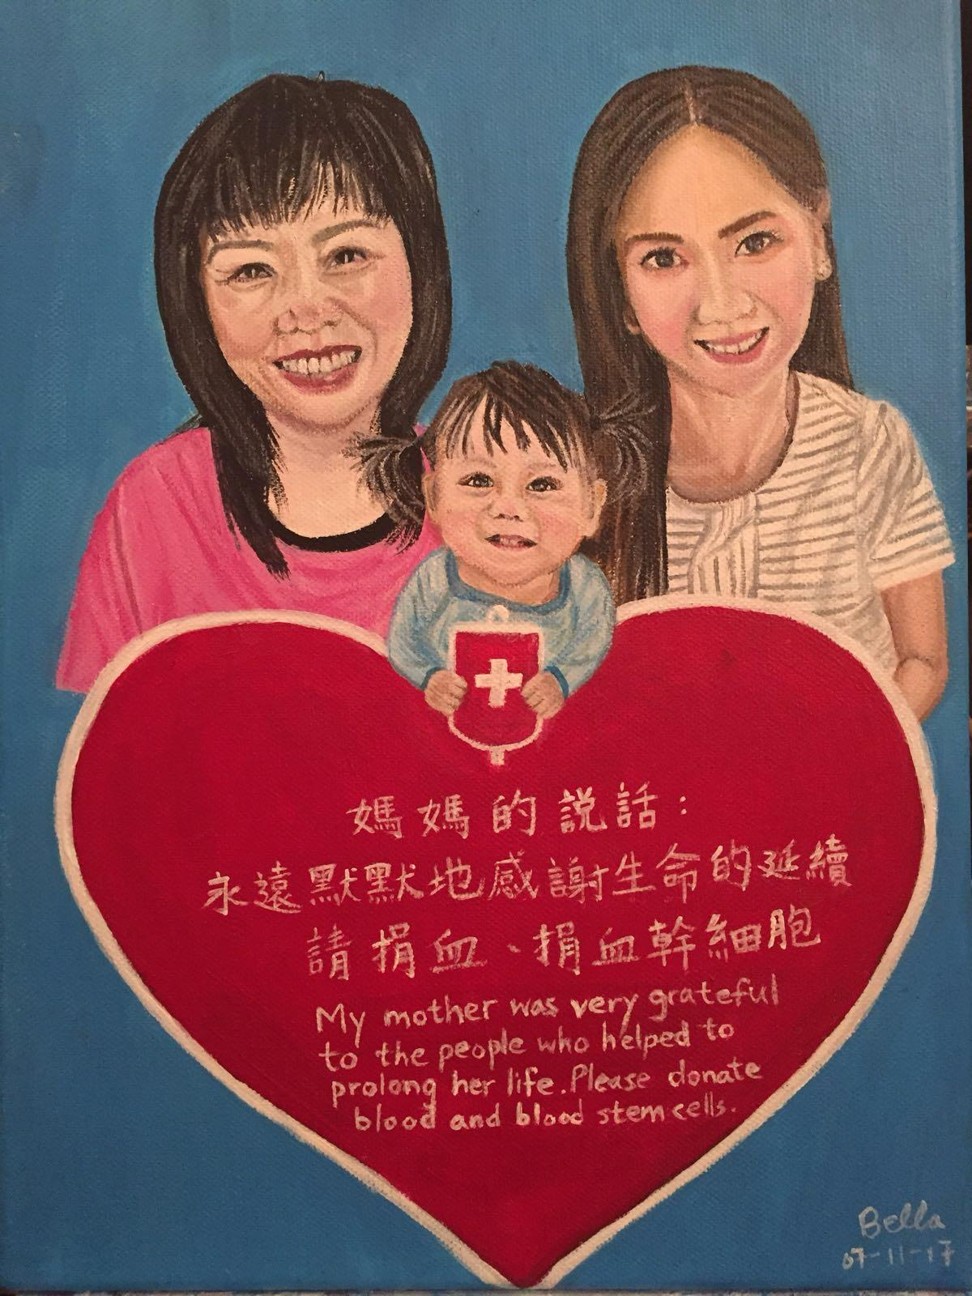 A painting of Yelly Chui's mother, Chui, and Chui's daughter, by a local artist. Photo: Handout